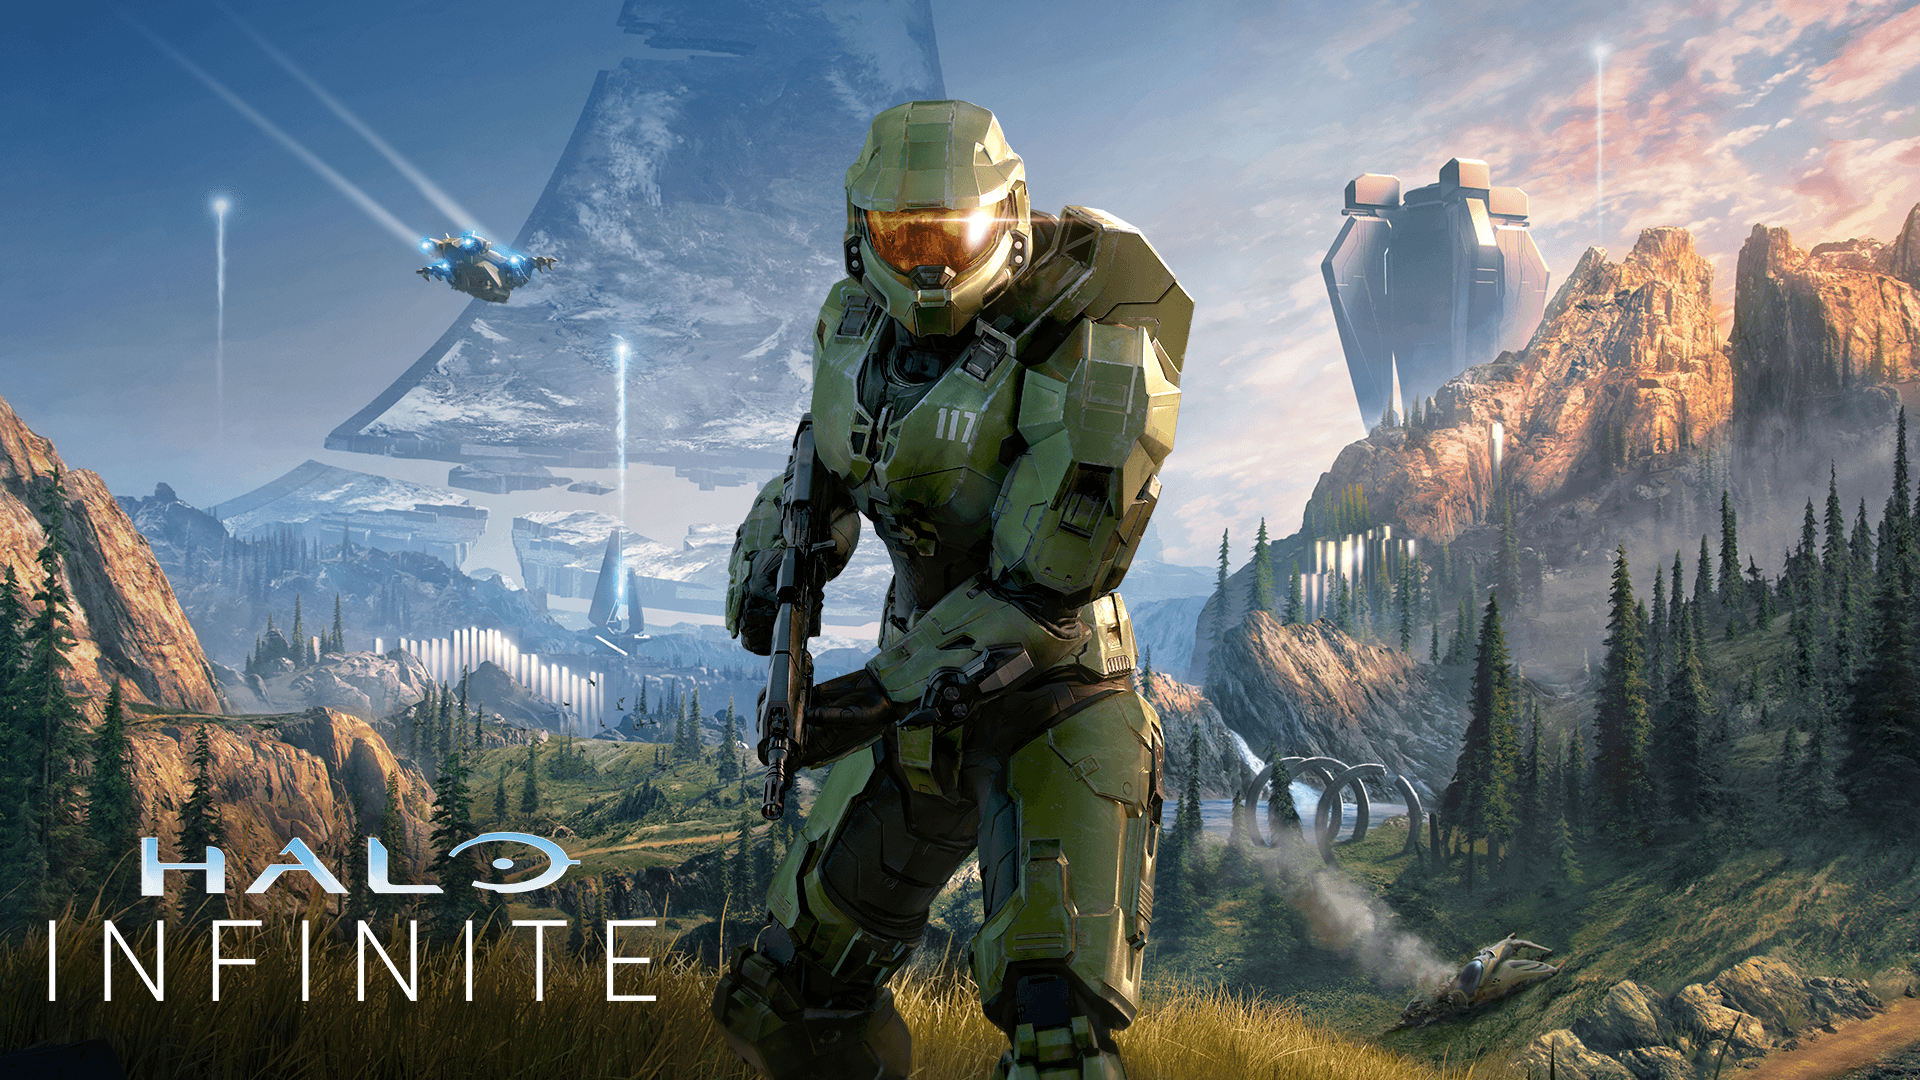 Halo is one of the most successful video game franchises, having a huge impact on the video game industry.